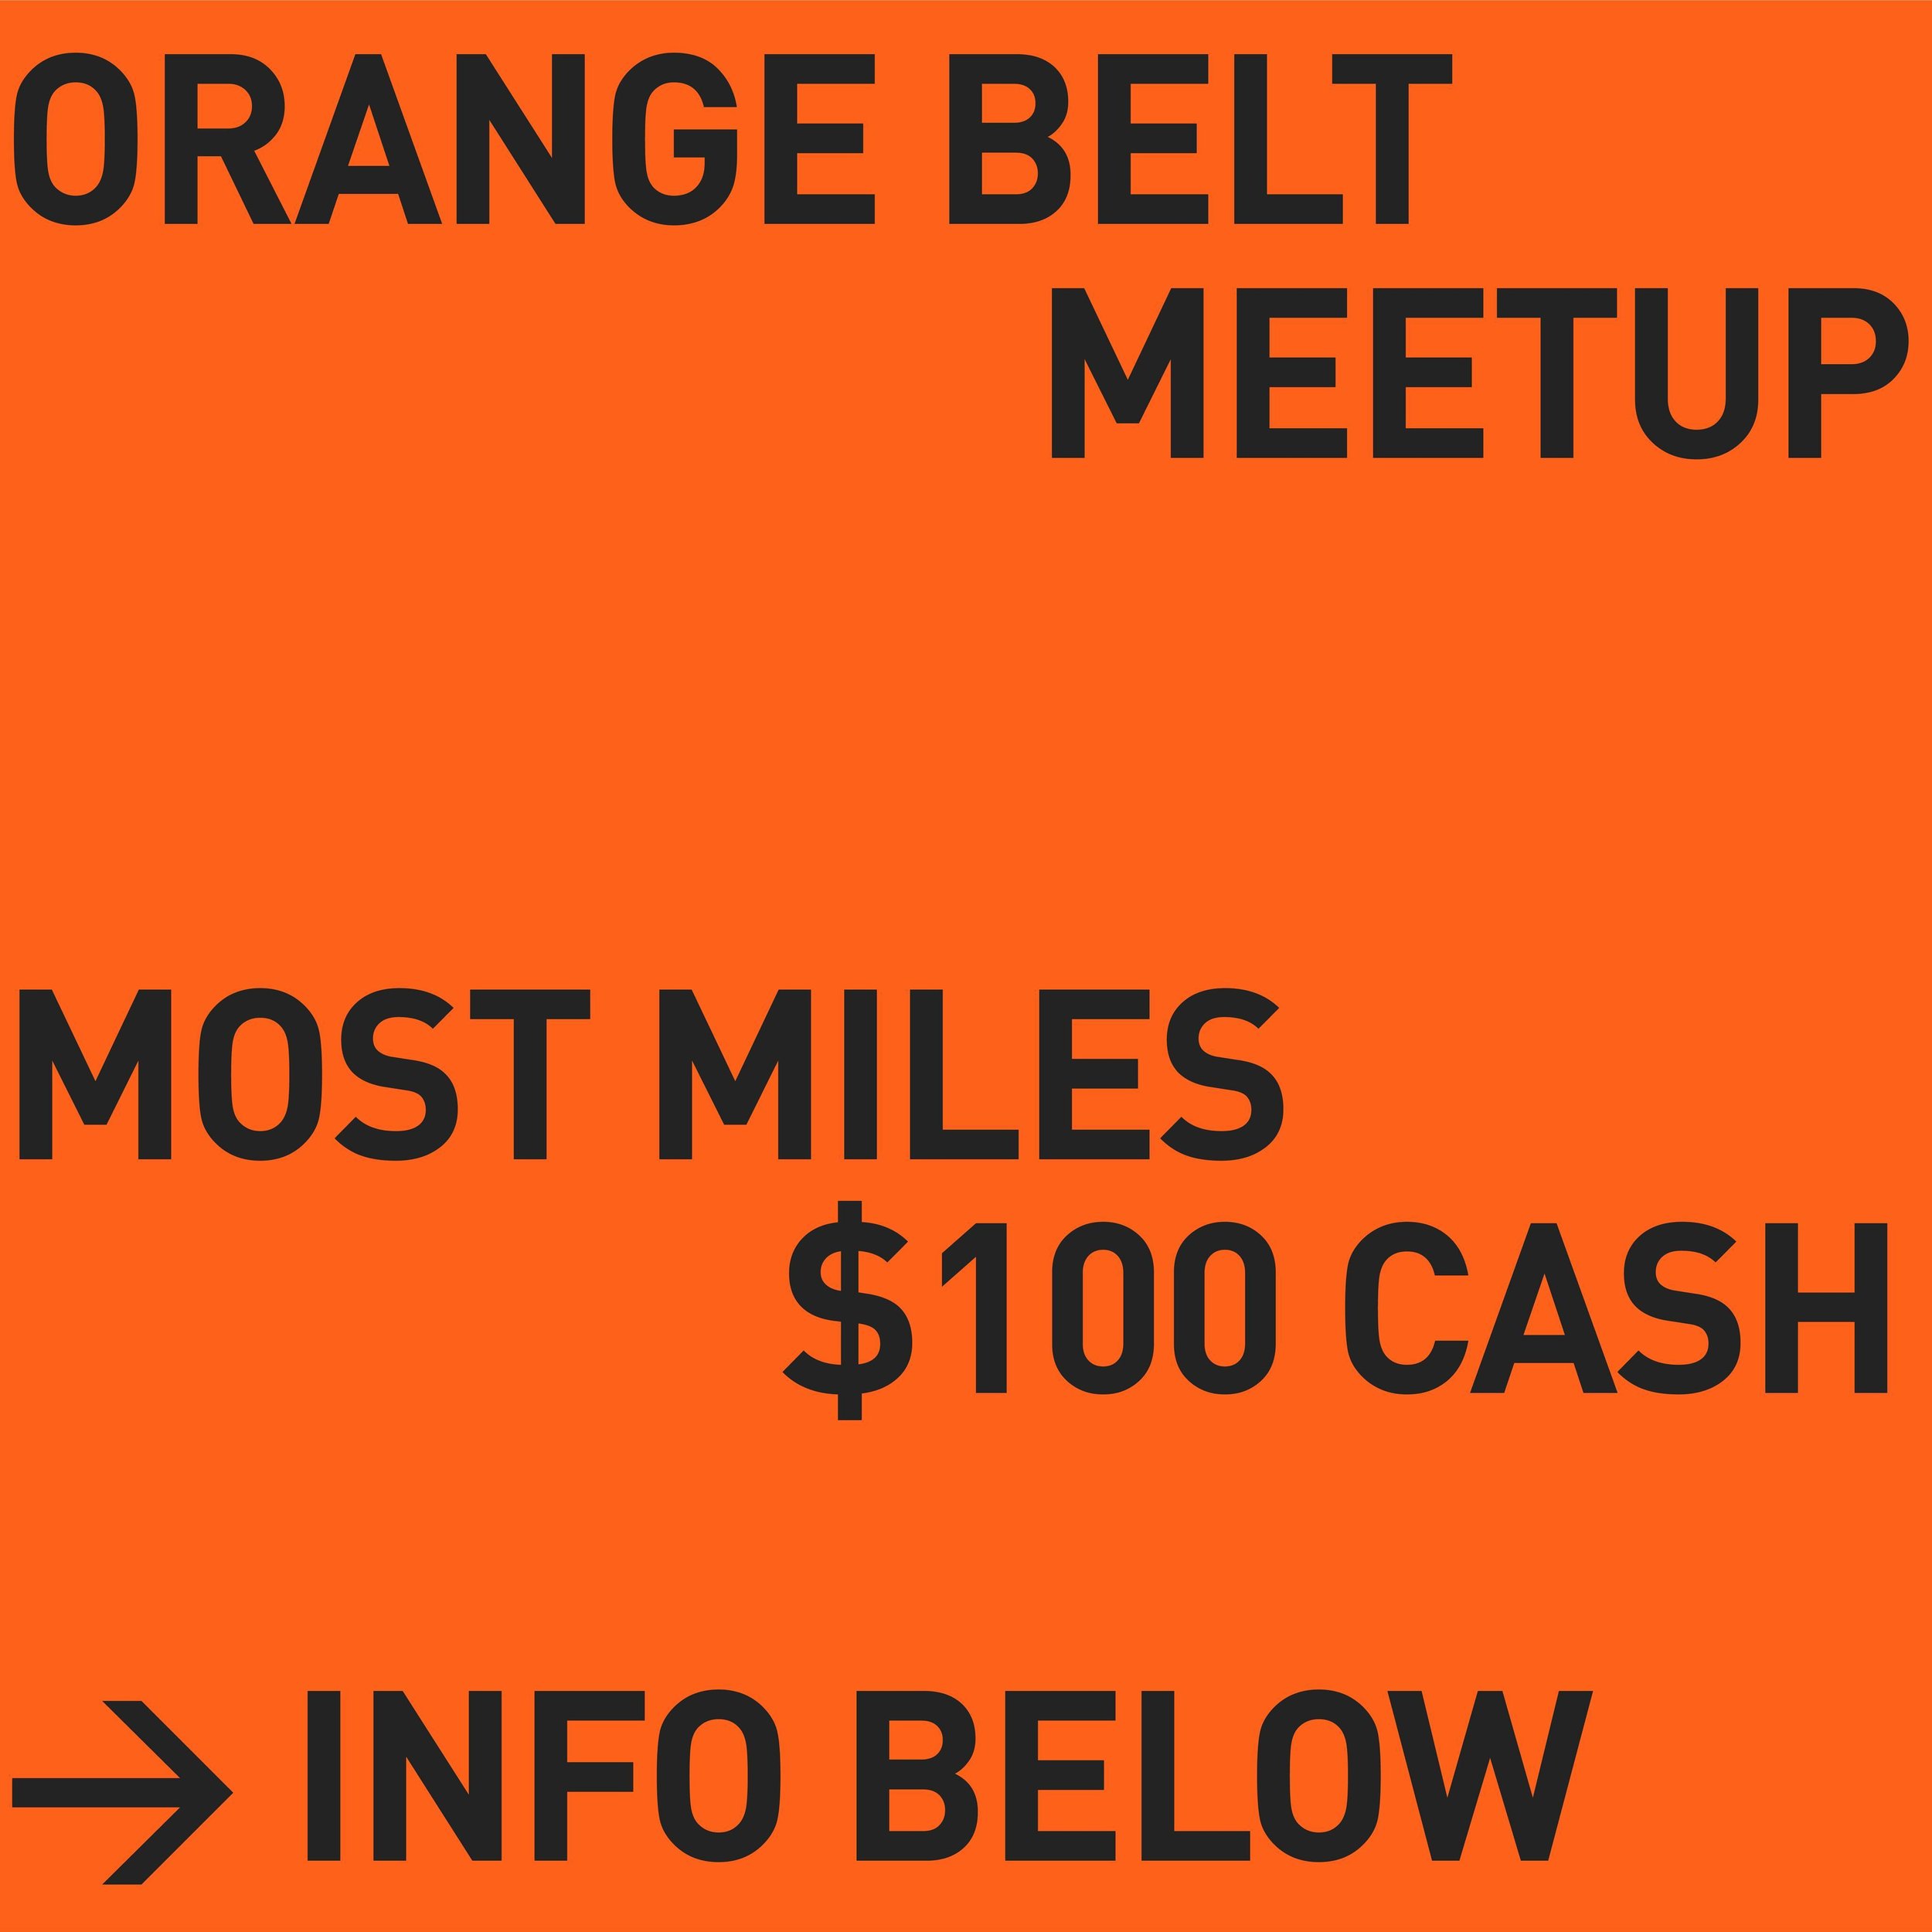 Most Miles: If it&rsquo;s not on Strava, it didn&rsquo;t happen. The ride must start on Saturday, May 4th, and finish by 11a. Let&rsquo;s keep it simple, one rider, one ride, finished by 11a. Riders must follow our Orange Belt Club Page on Strava. In